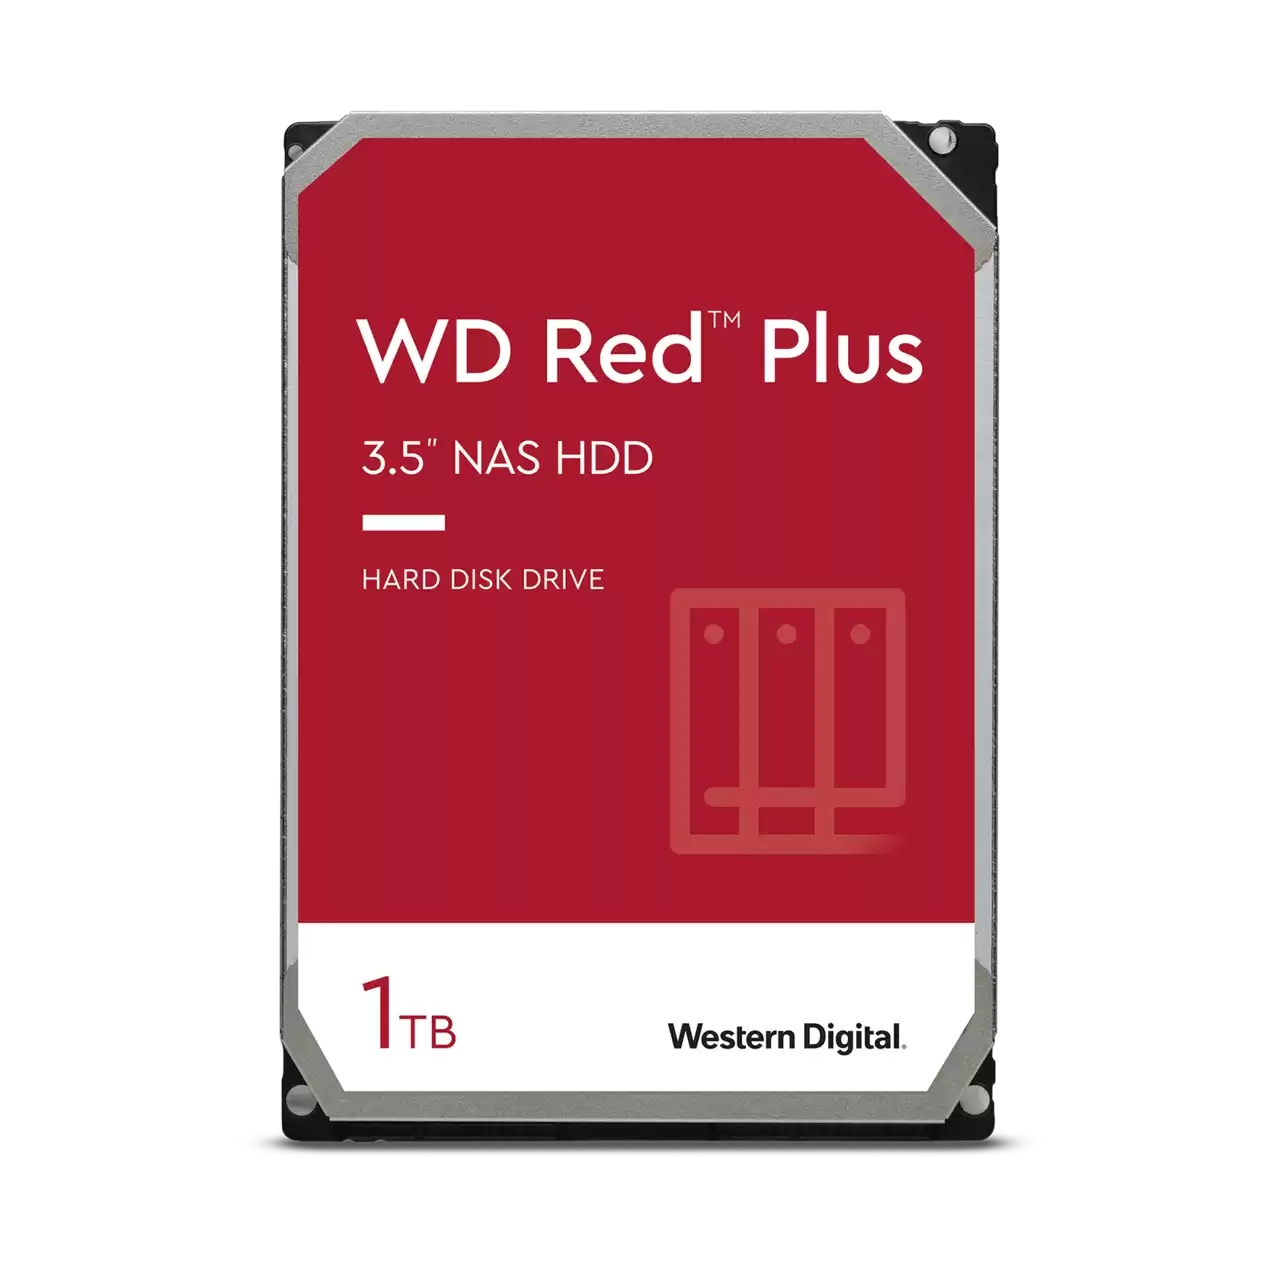 WD Red Plus NAS Hard Drive 3.5-Inch - 1TB - 3.5 SATA - WD10EFRX